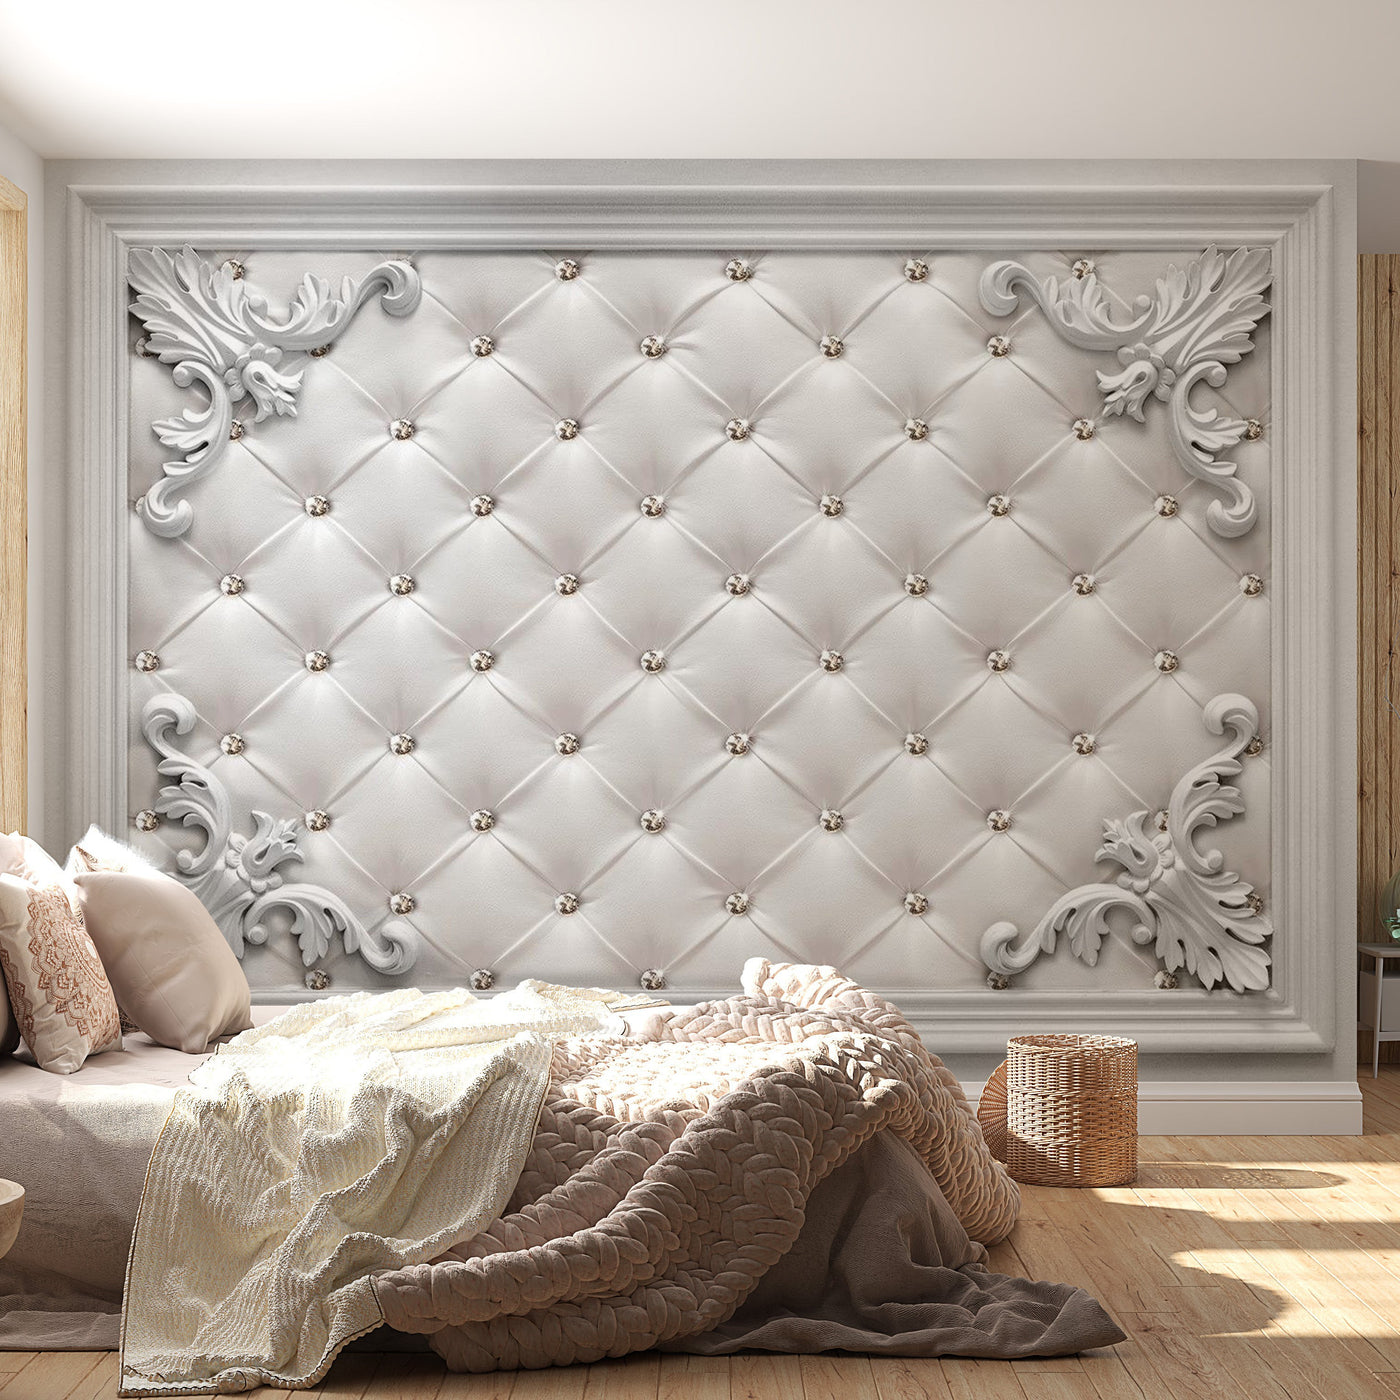 Peel & Stick Wall Mural - White Chesterfield and Ornaments - Removable Wall Decals